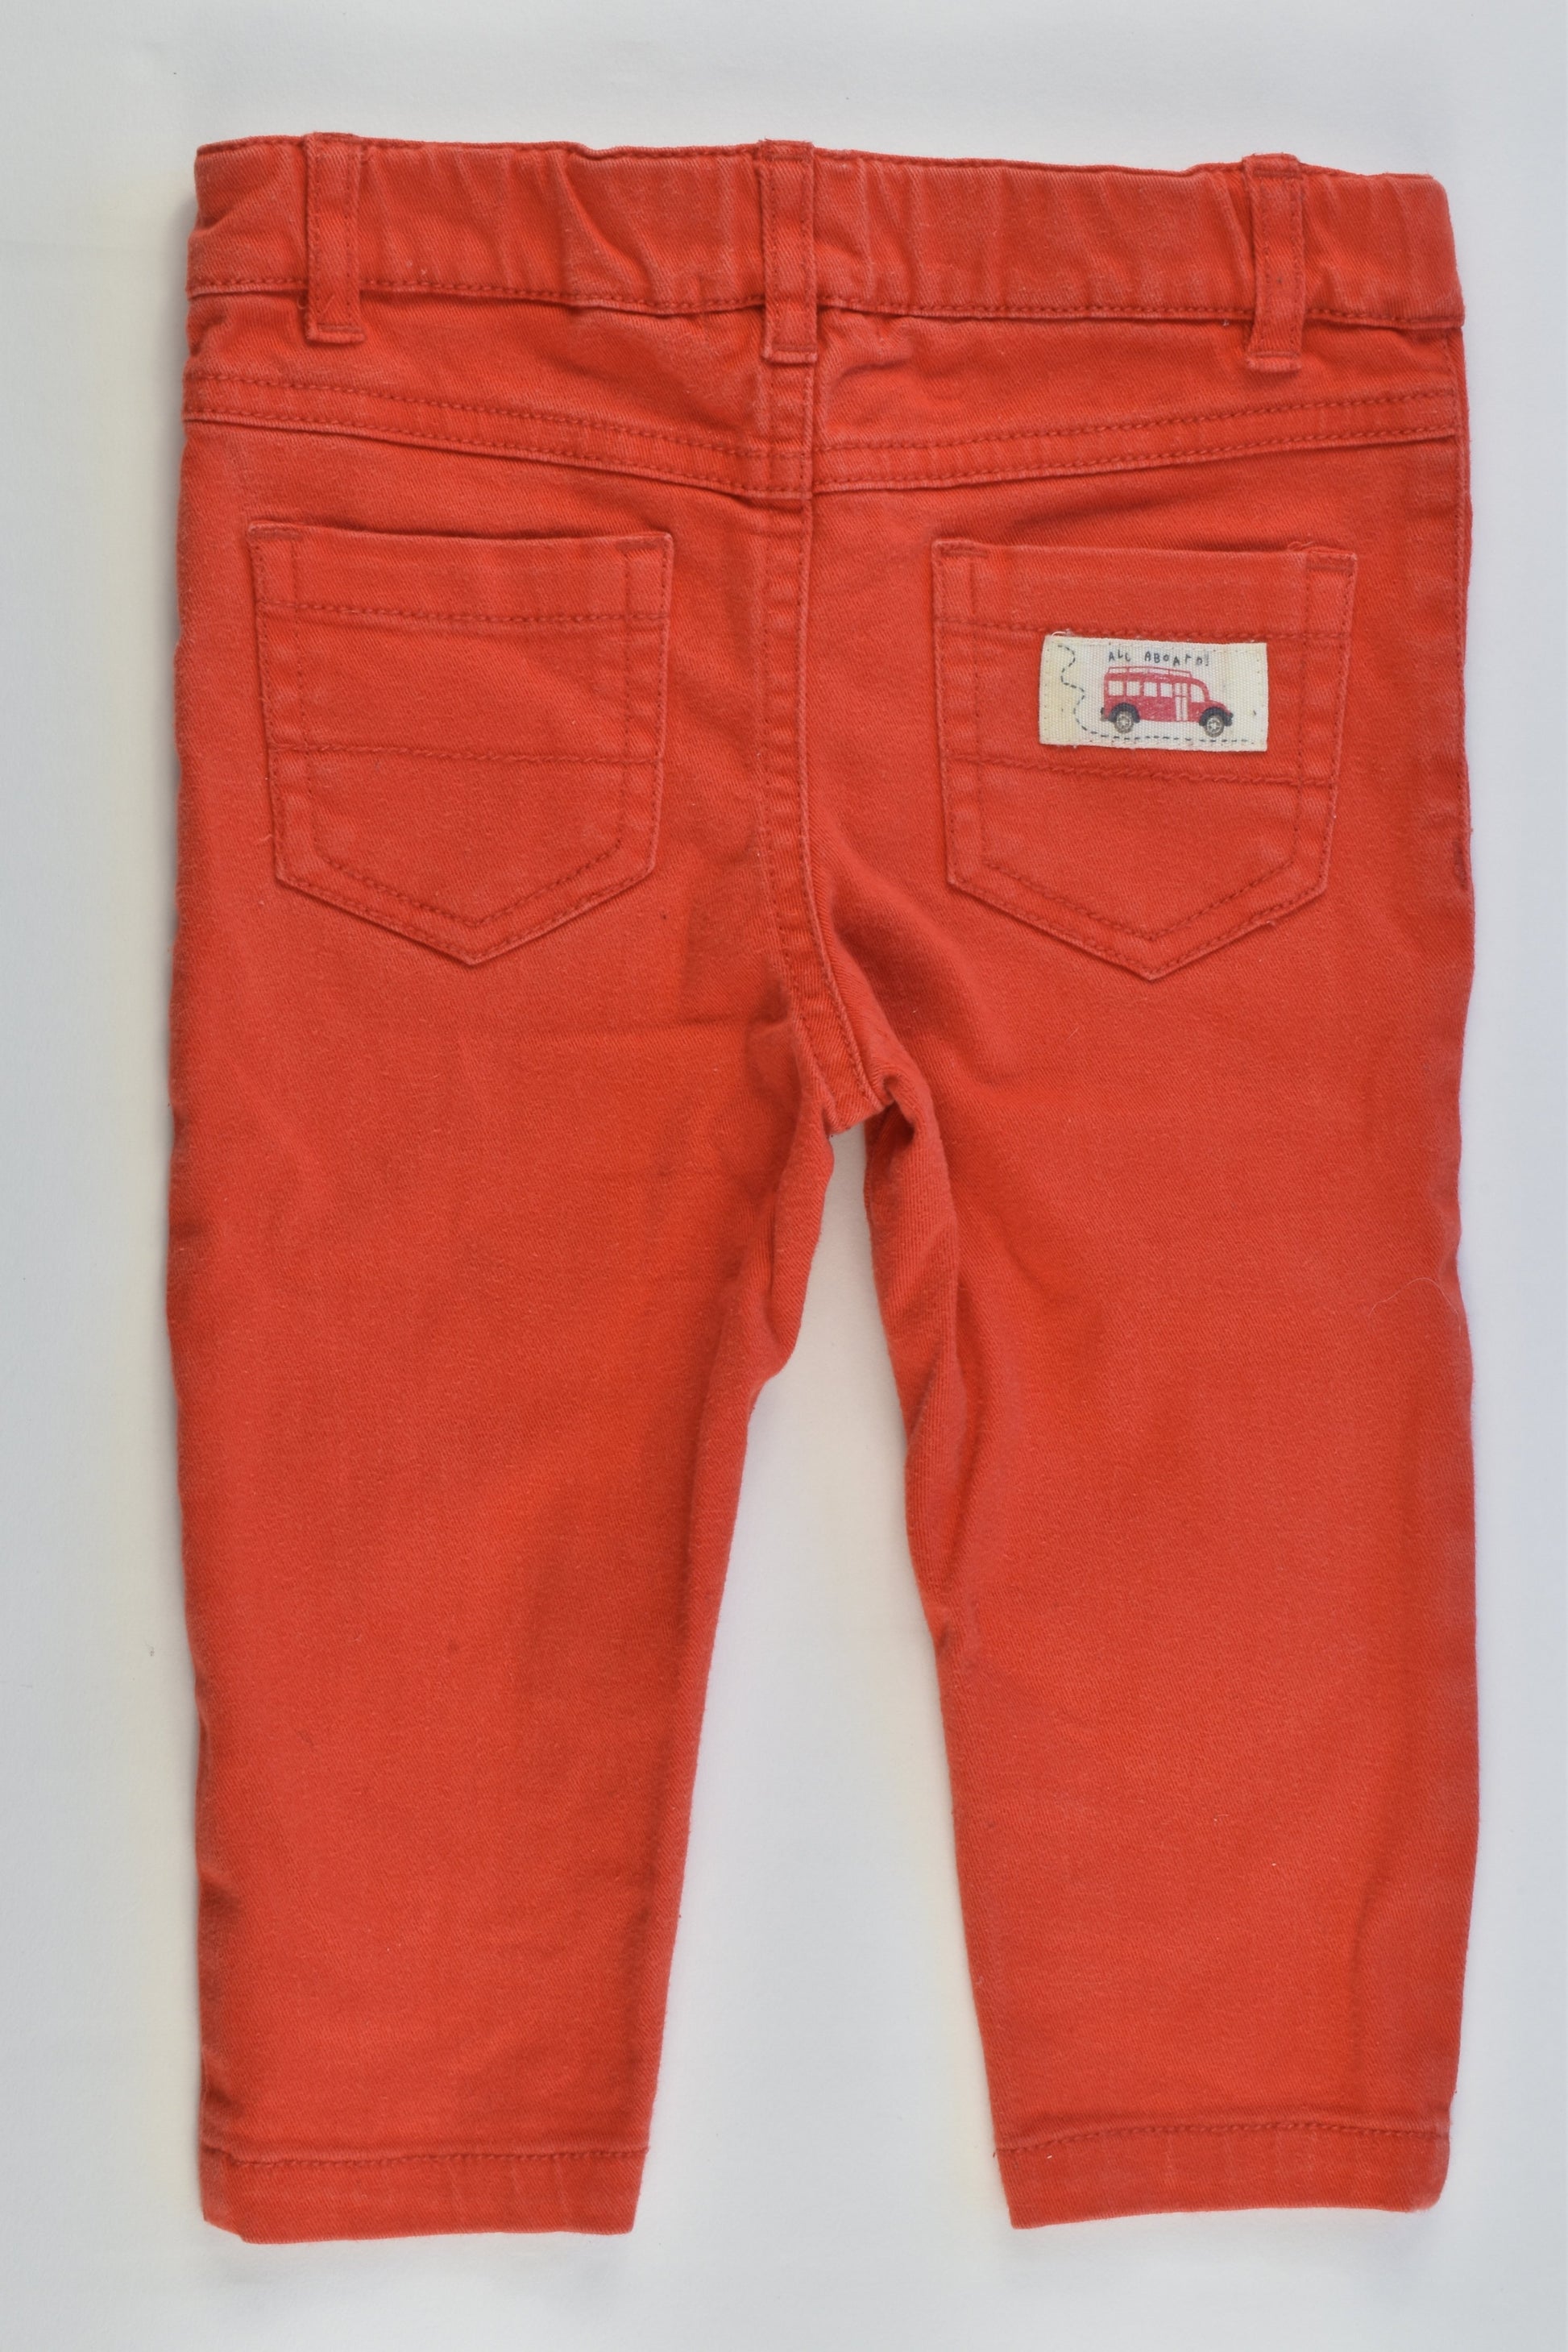 Purebaby Size 0 (6-12 months) 'All Aboard' Stretchy Pants